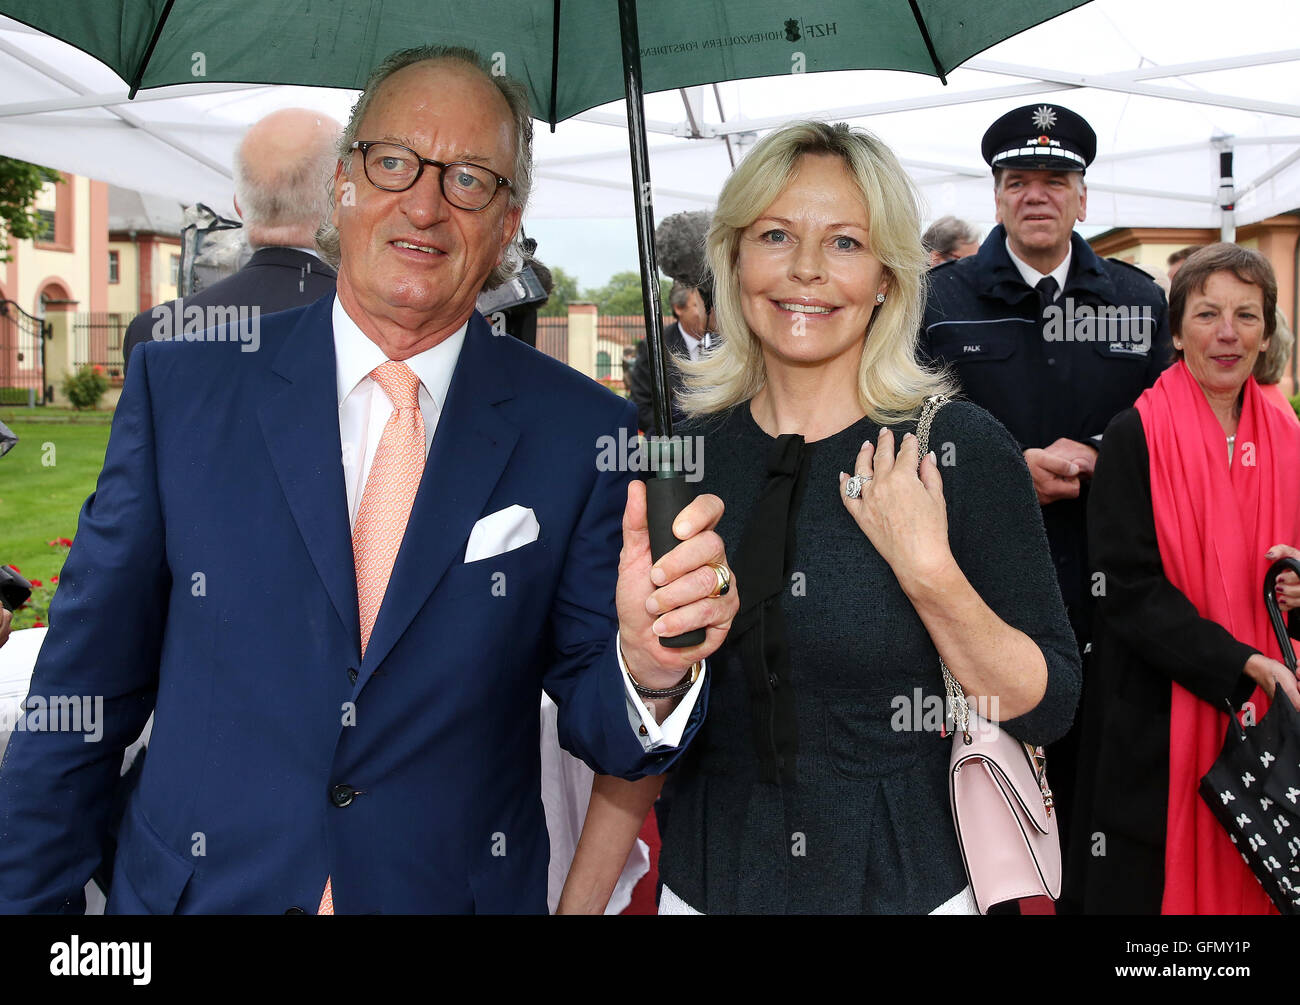 Altshausen, Germany. 31st July, 2016. Karl Friedrich Prince of Hohenzollern (l) and his wife Katharina Princess of Hohenzollern posing during a reception on the evening before the 80th birthday of Herzog Carl von Wuerttemberg in the garden of Altshausen palace in Altshausen, Germany, 31 July 2016. PHOTO: THOMAS WARNACK/dpa/Alamy Live News Stock Photo